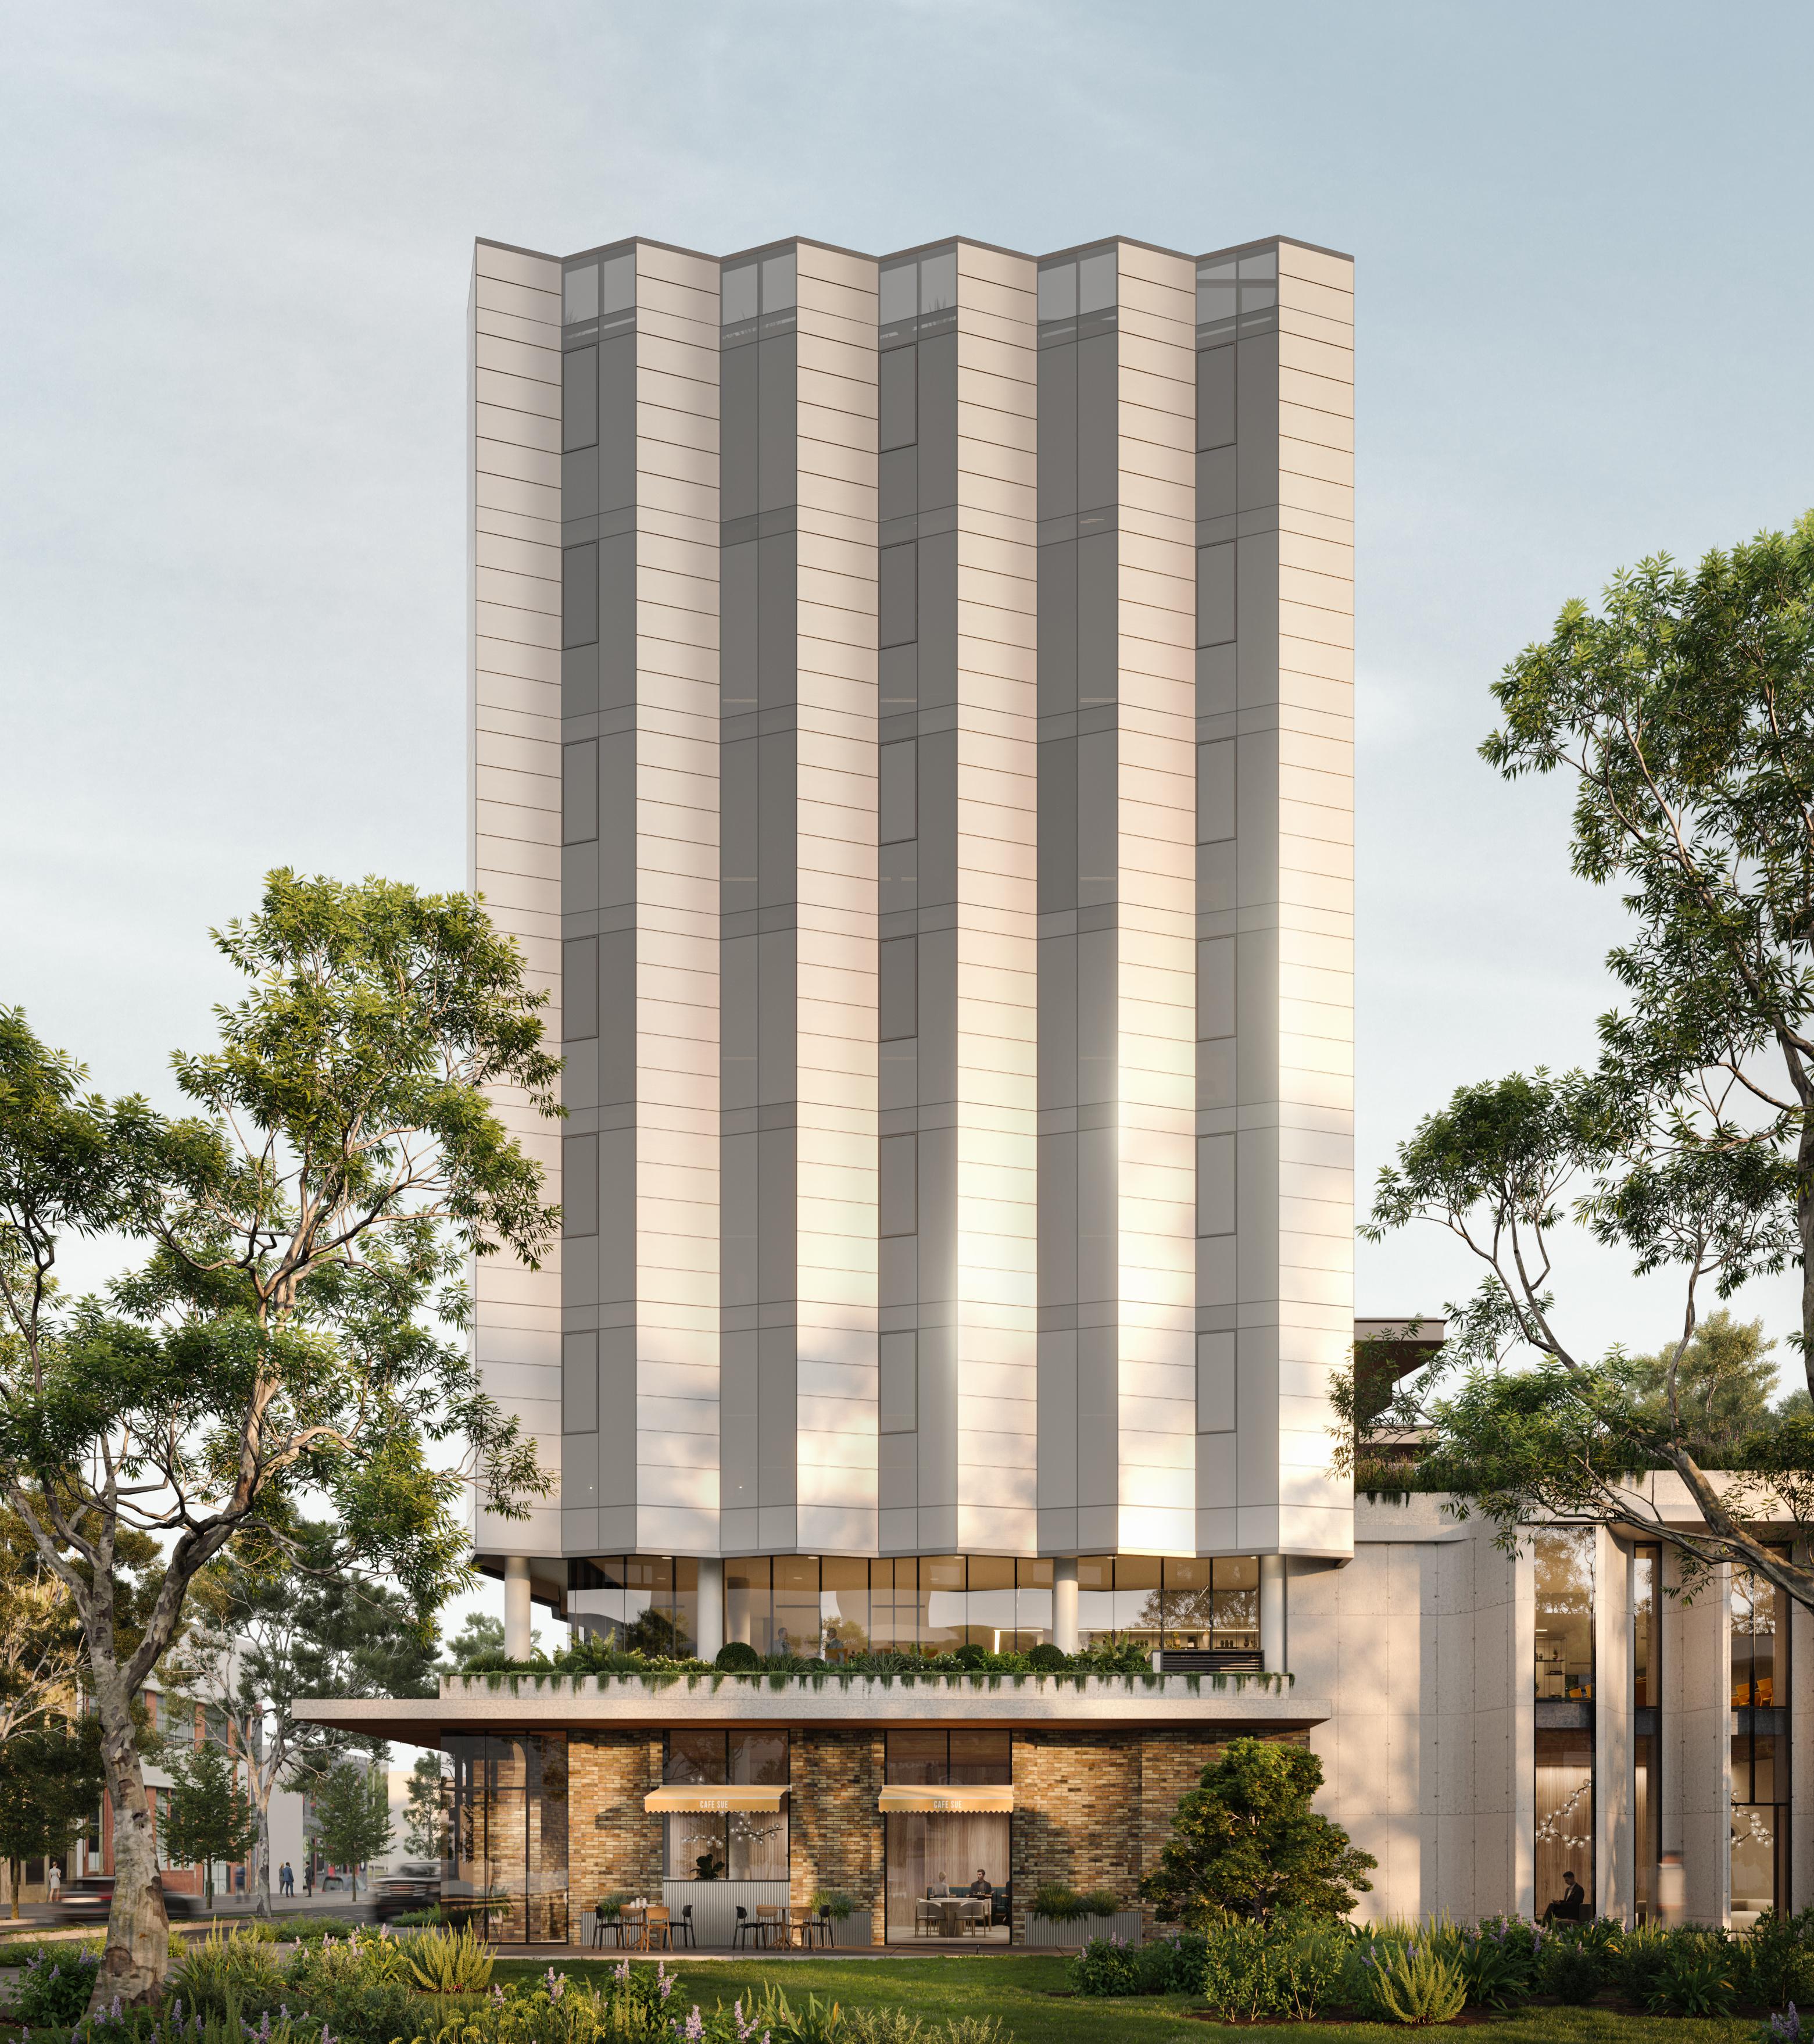 Tower of power: new office building to be fully clad in solar panels in Australian first